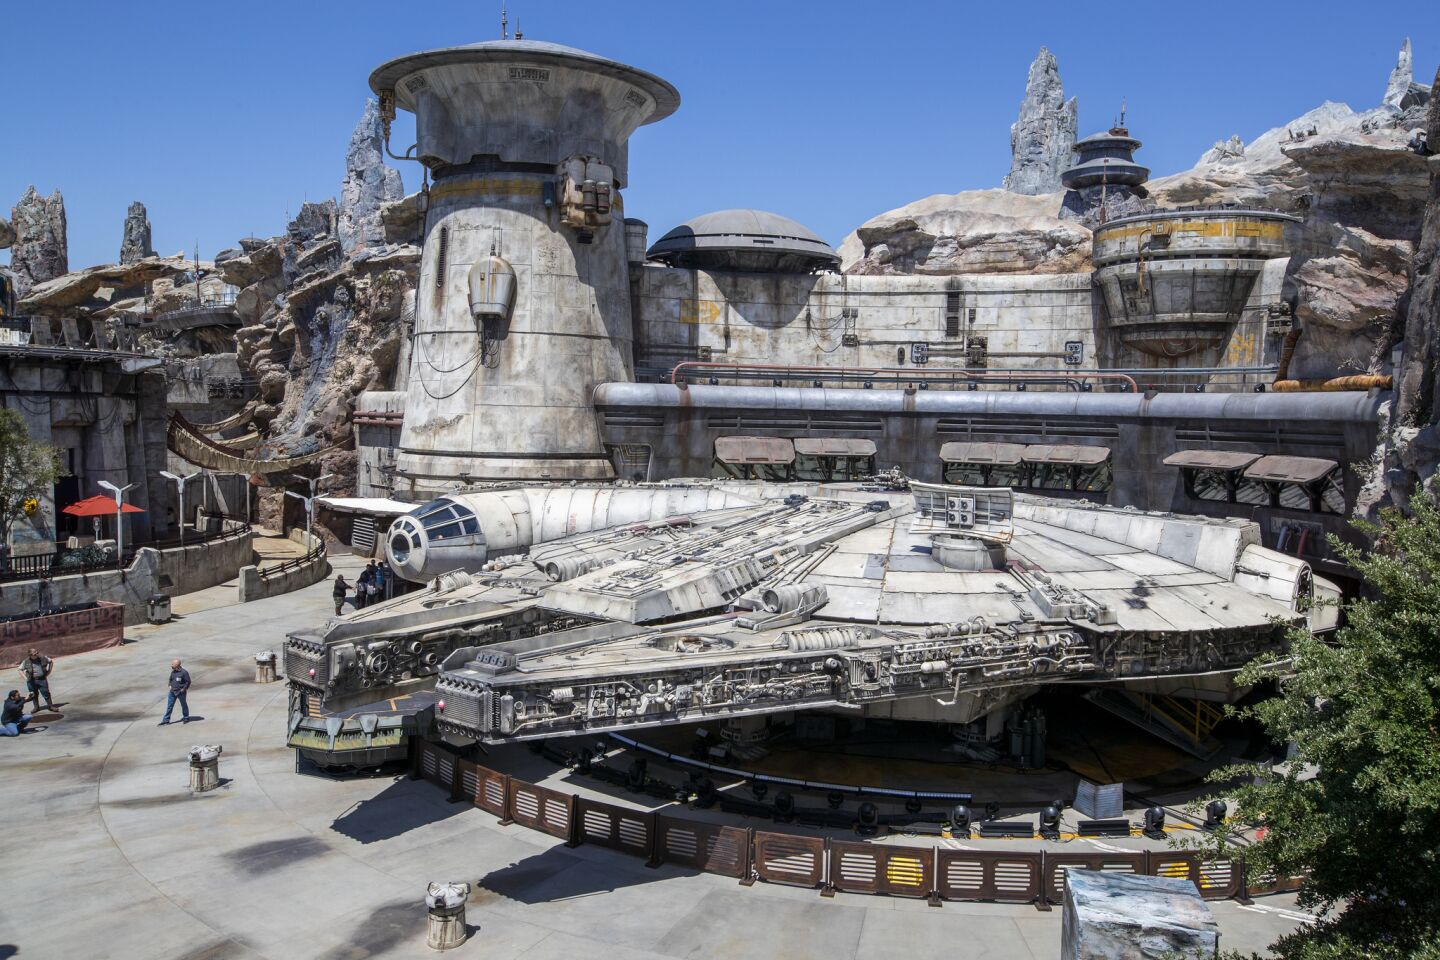 A preview of the Millennium Falcon: Smugglers Run section of Star Wars: Galaxy's Edge at Disneyland.